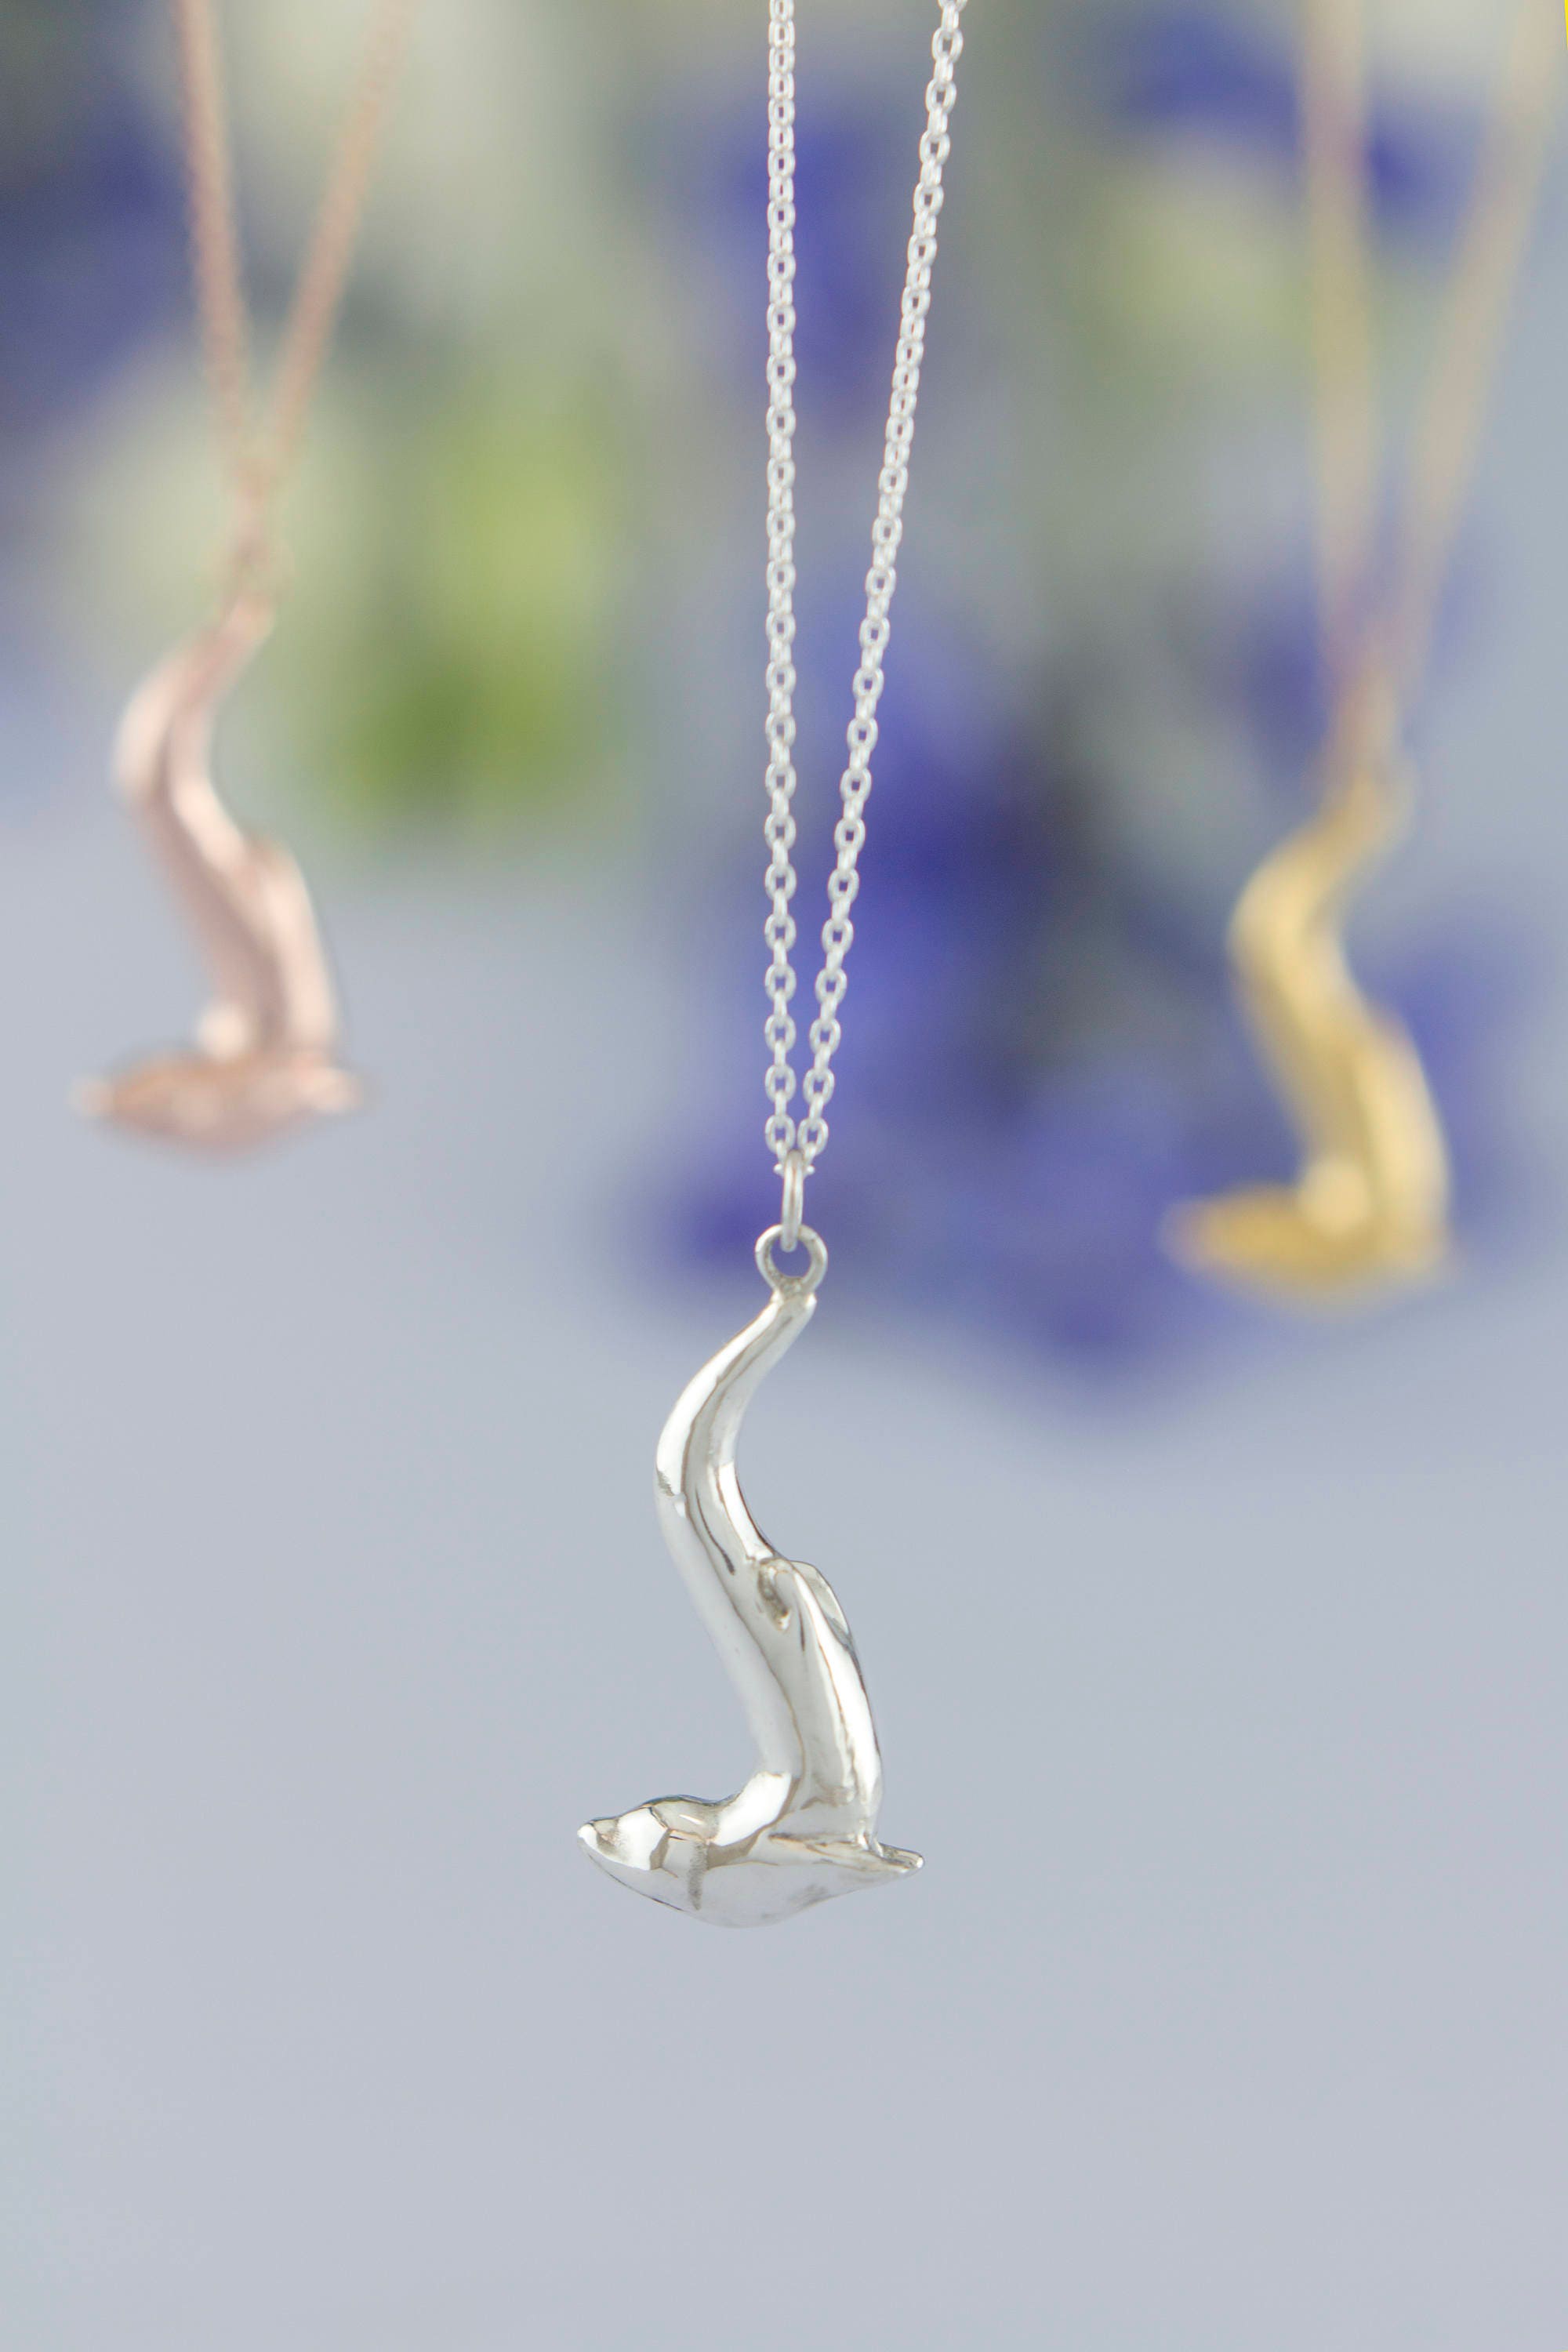 Otter Necklace Diving | Hand Carved Design Sterling Silver Gold Rose Personalised Animal Pendant By Rosalind Elunyd Jewellery